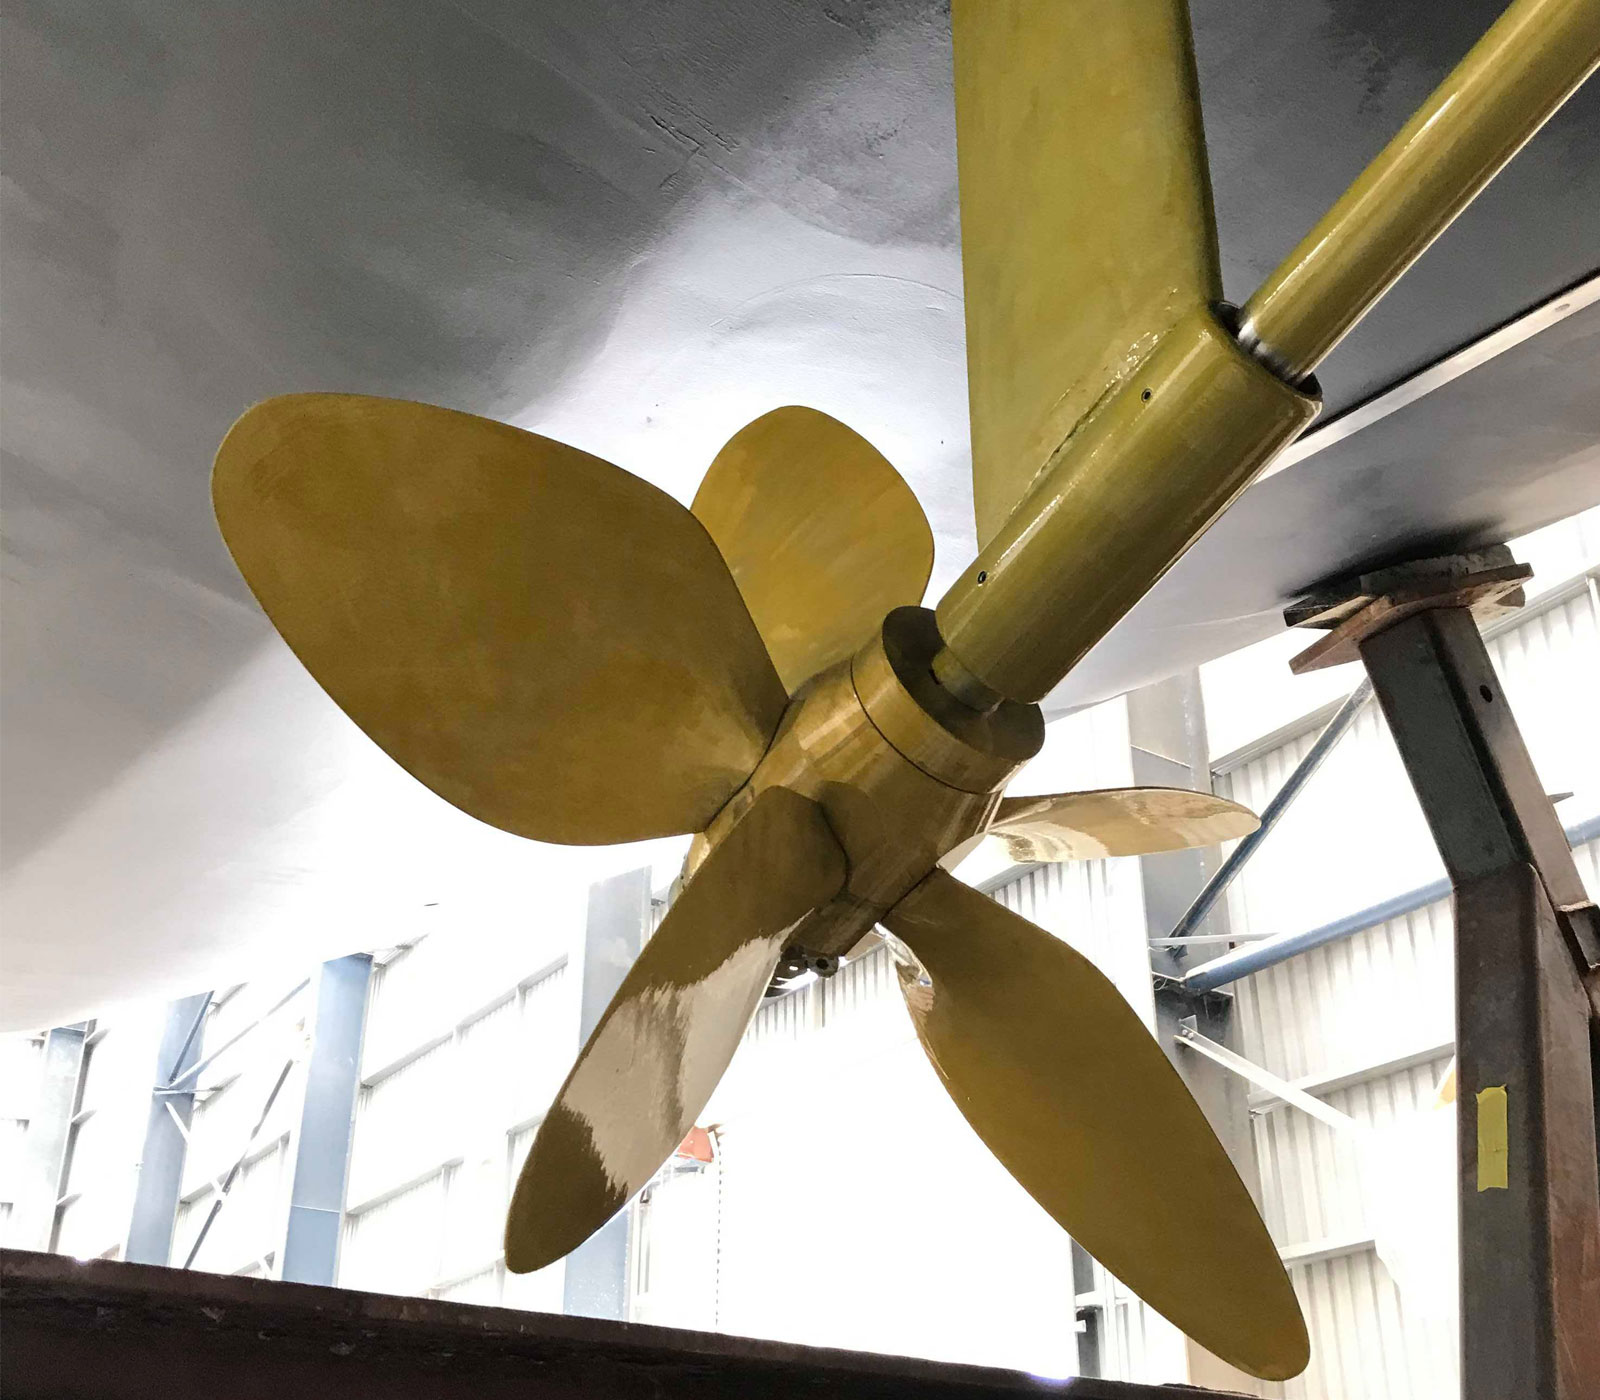 Propspeed applied to sailing yacht Lion New Zealand's propeller and shaft